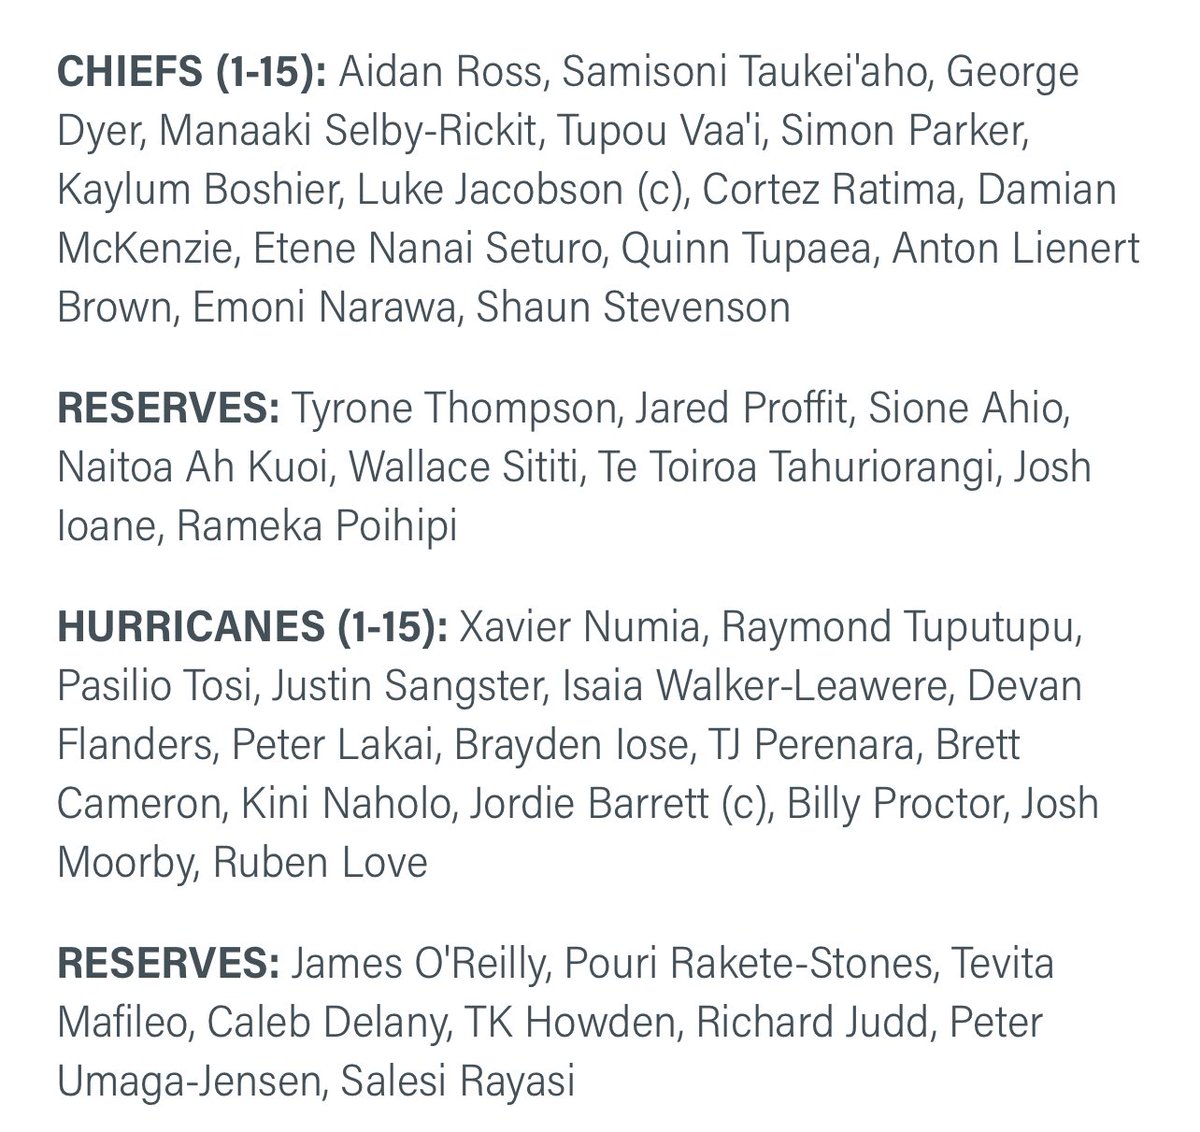 Les compos pour @ChiefsRugby - @Hurricanesrugby !

⏱️ Vendredi, 09h05

🏟️ FMG Stadium Waikato, Hamilton

#CHIvHUR #SuperRugbyPacific